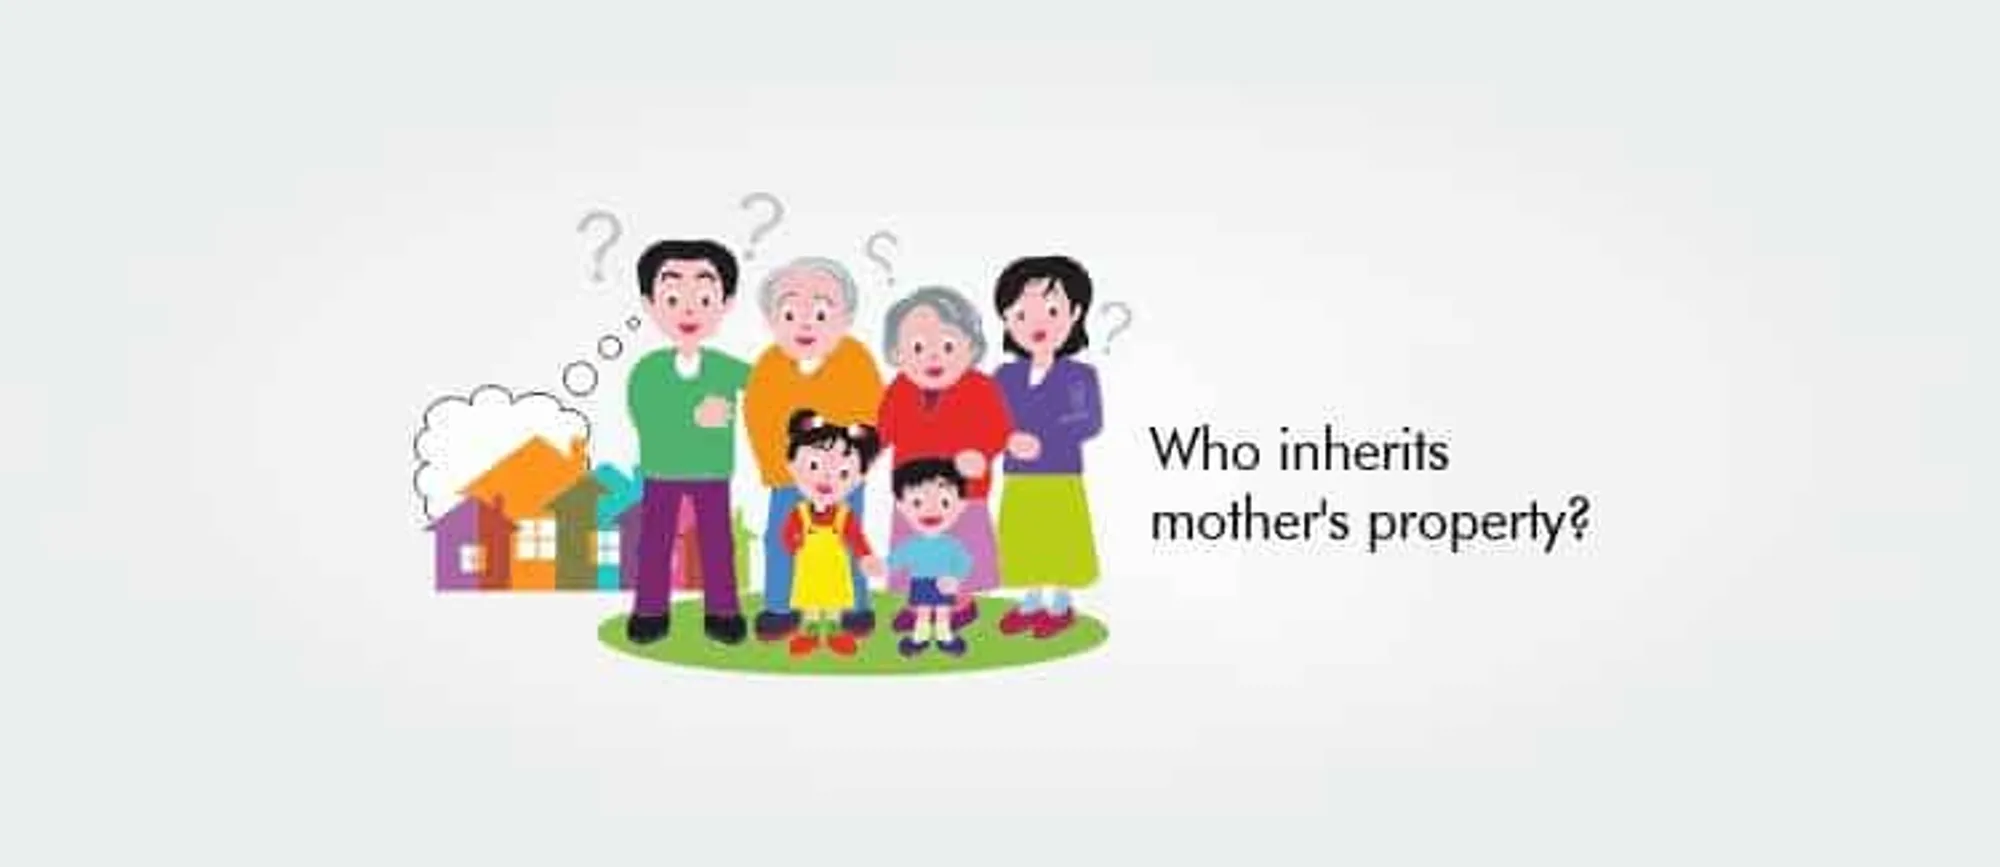 Who inherits mother's property?